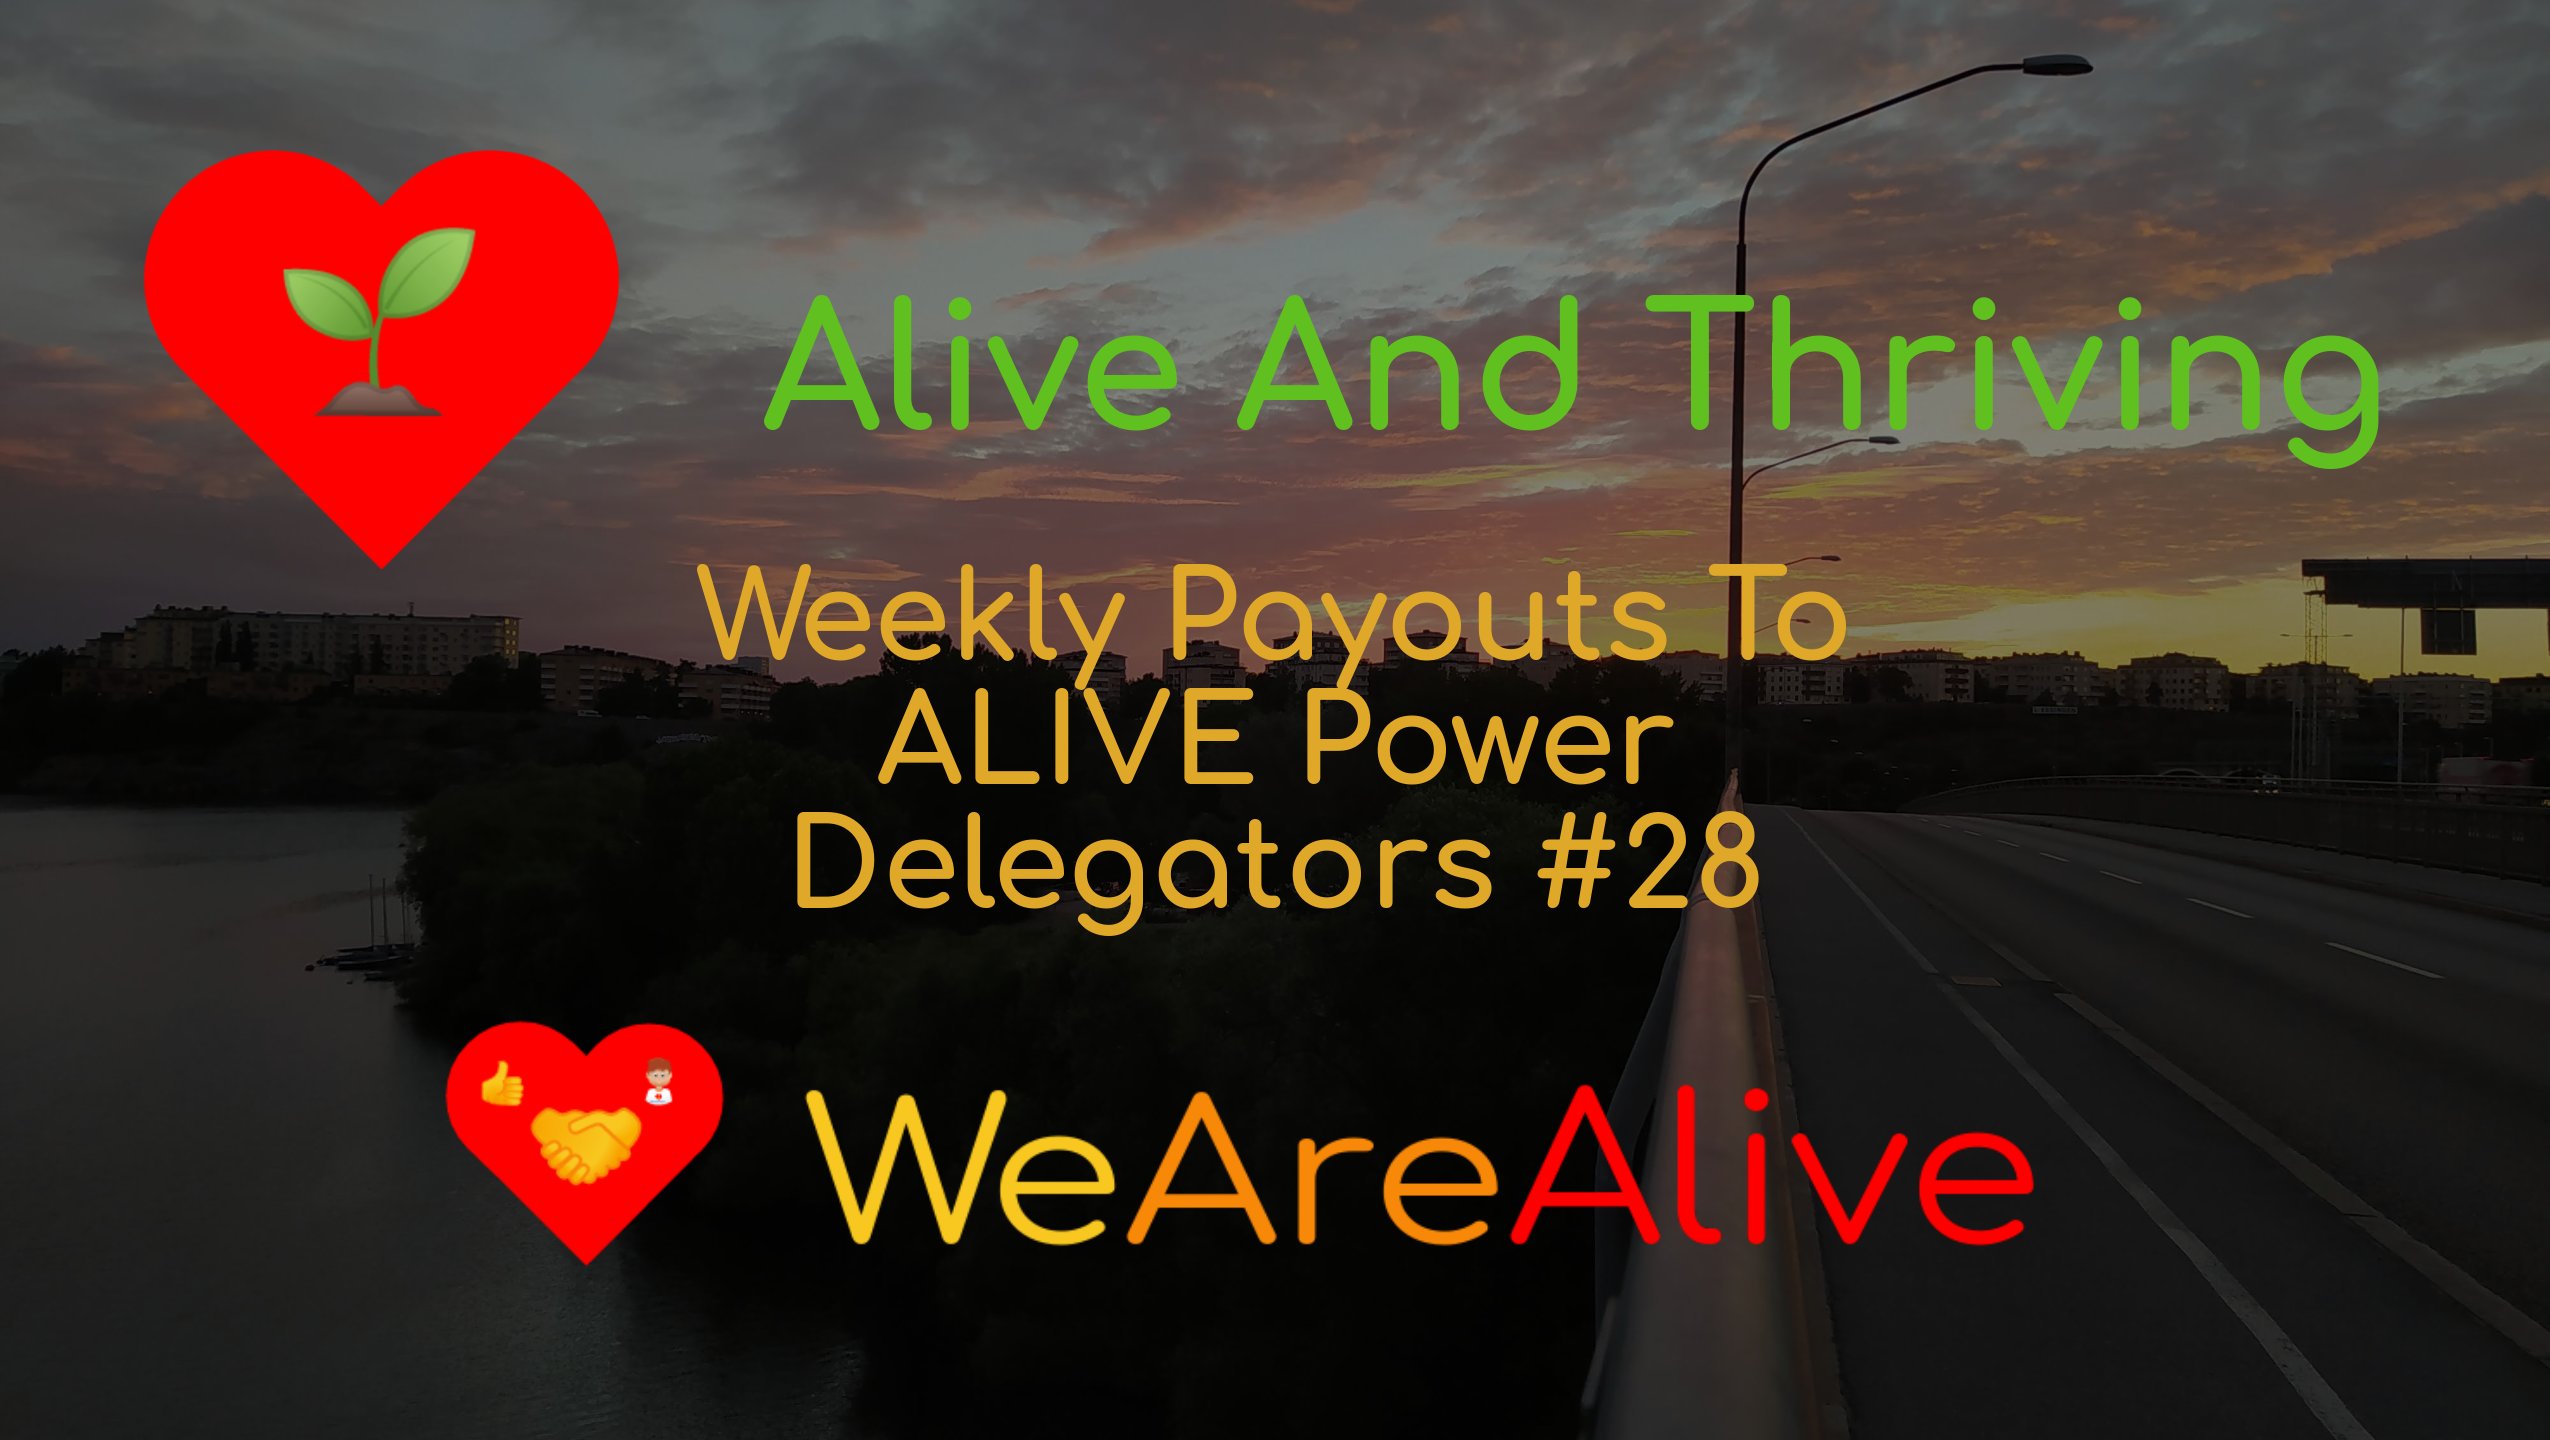 @wearealive/alive-and-thriving-weekly-payouts-to-alive-power-delegators-28